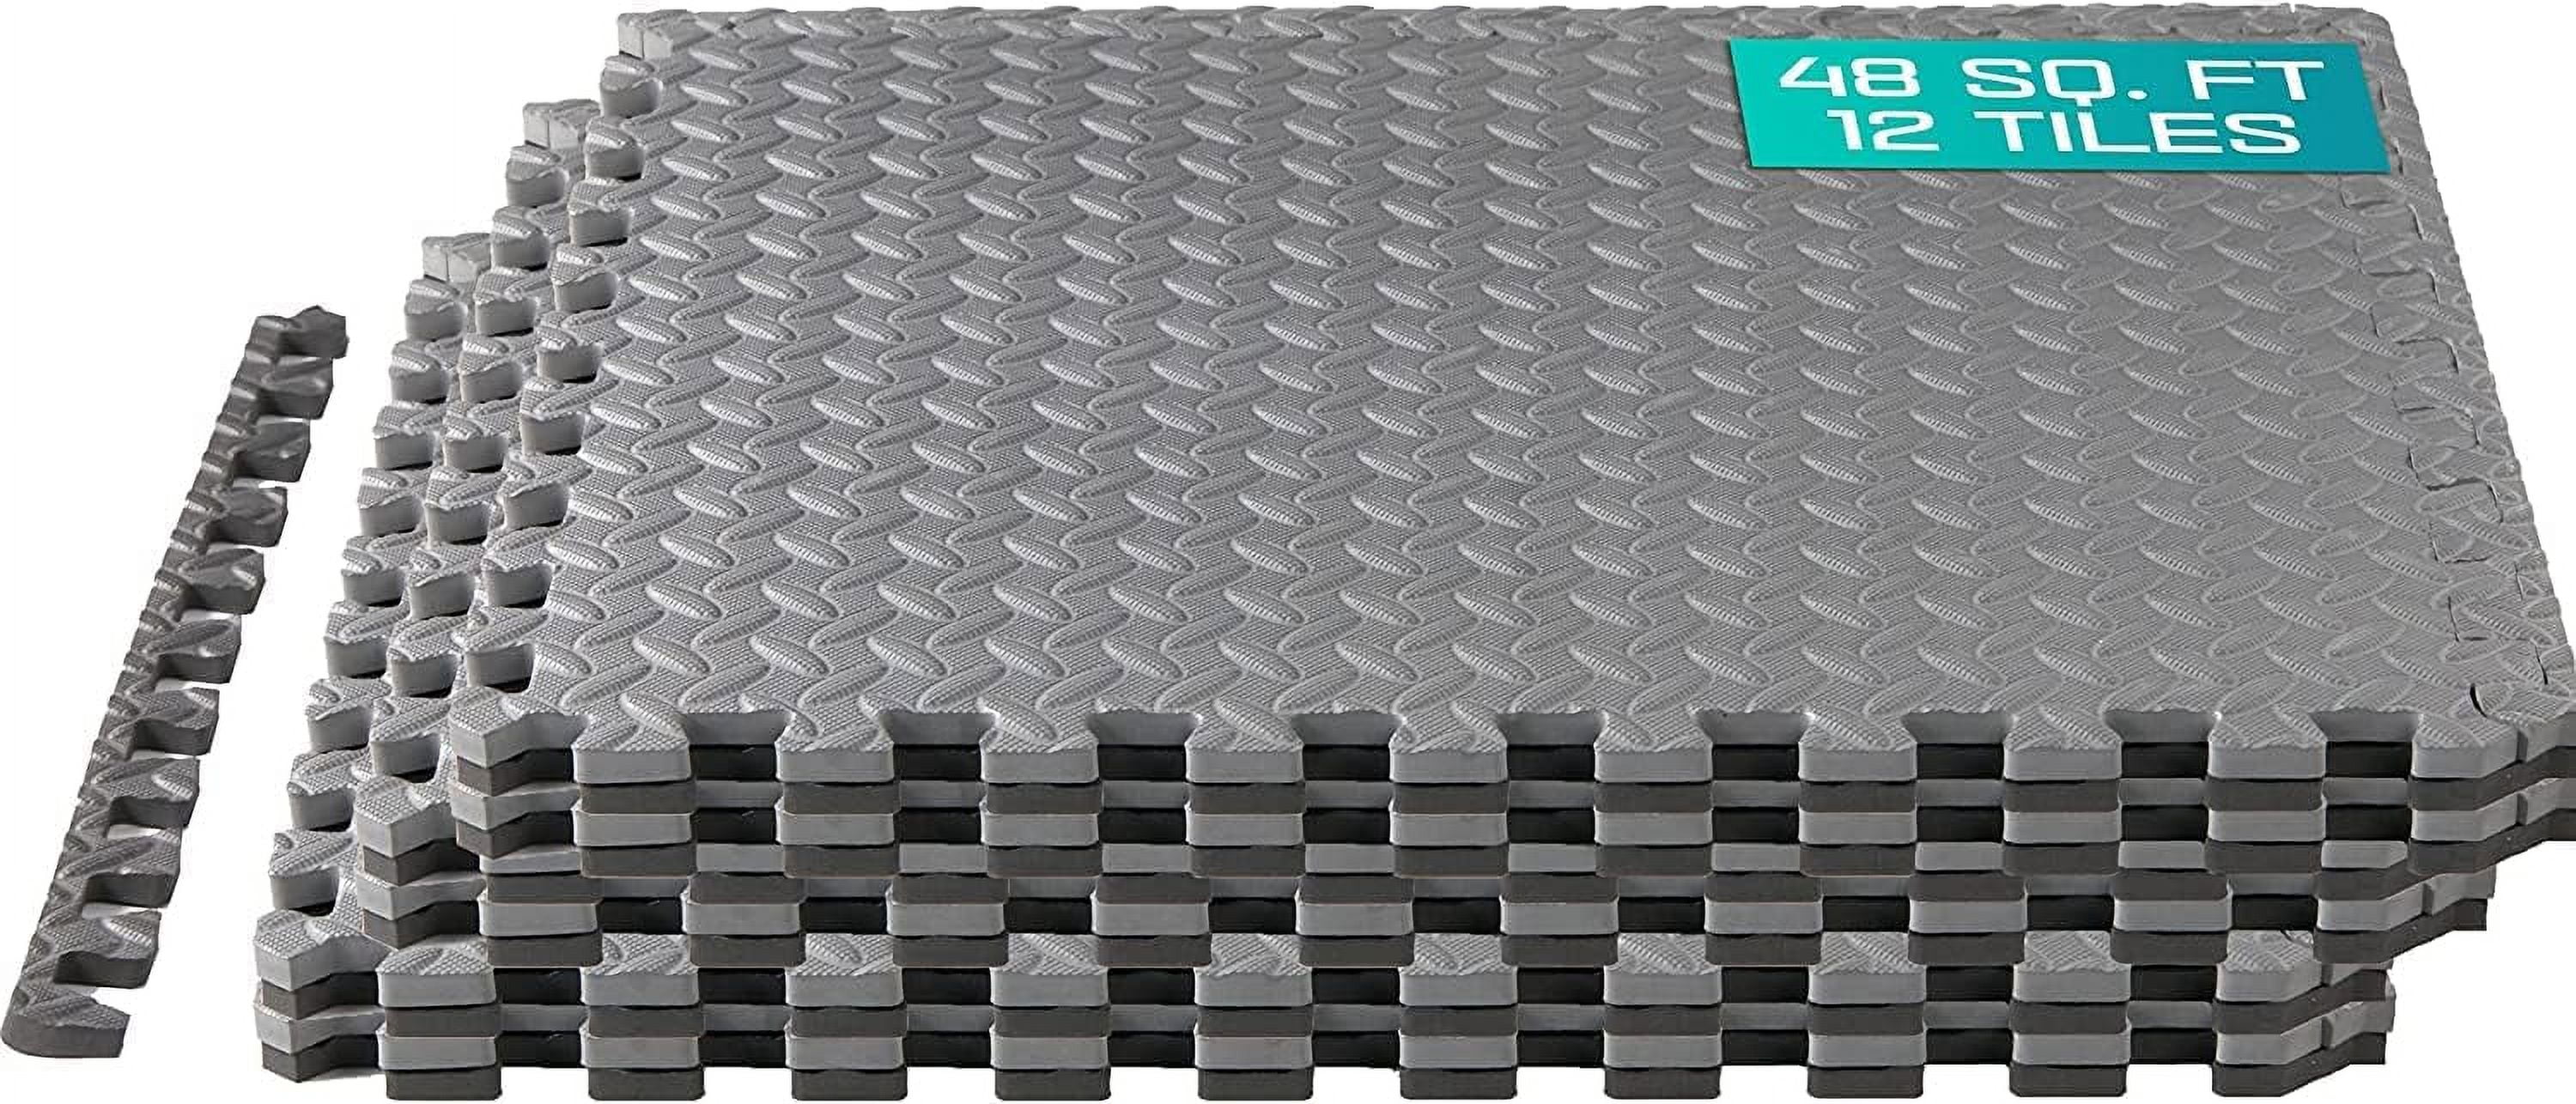 Yes4All 24, 48, 120 SQ. FT Puzzle/Interlocking Exercise Mat Tiles for ...